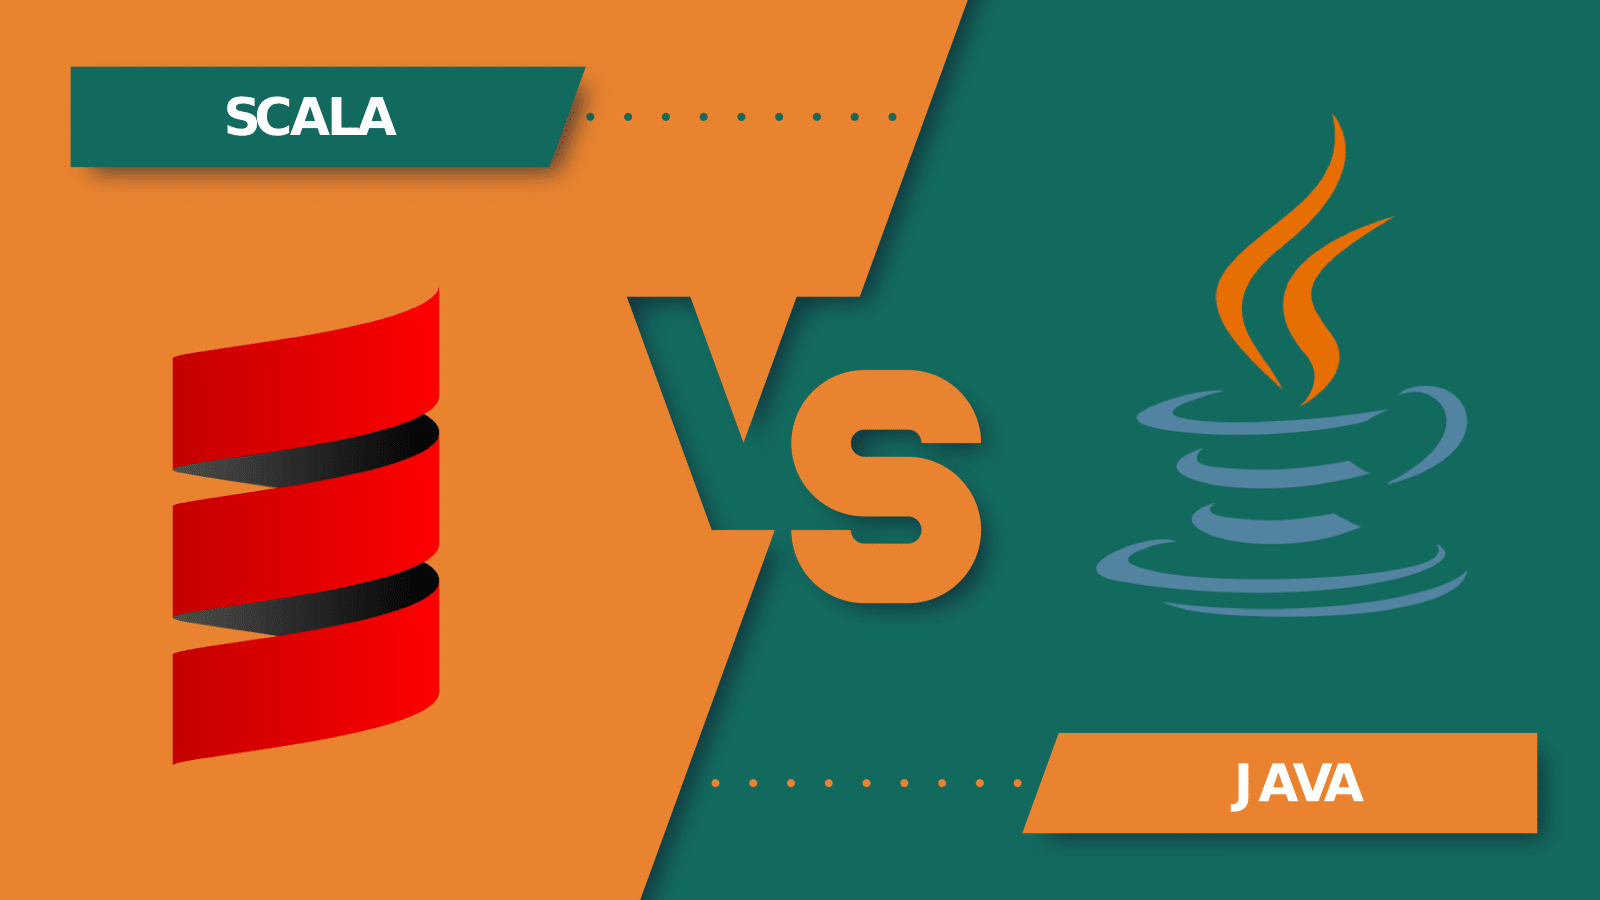 Comparison image, with Scala logo on the left side and the Java logo on the right side.